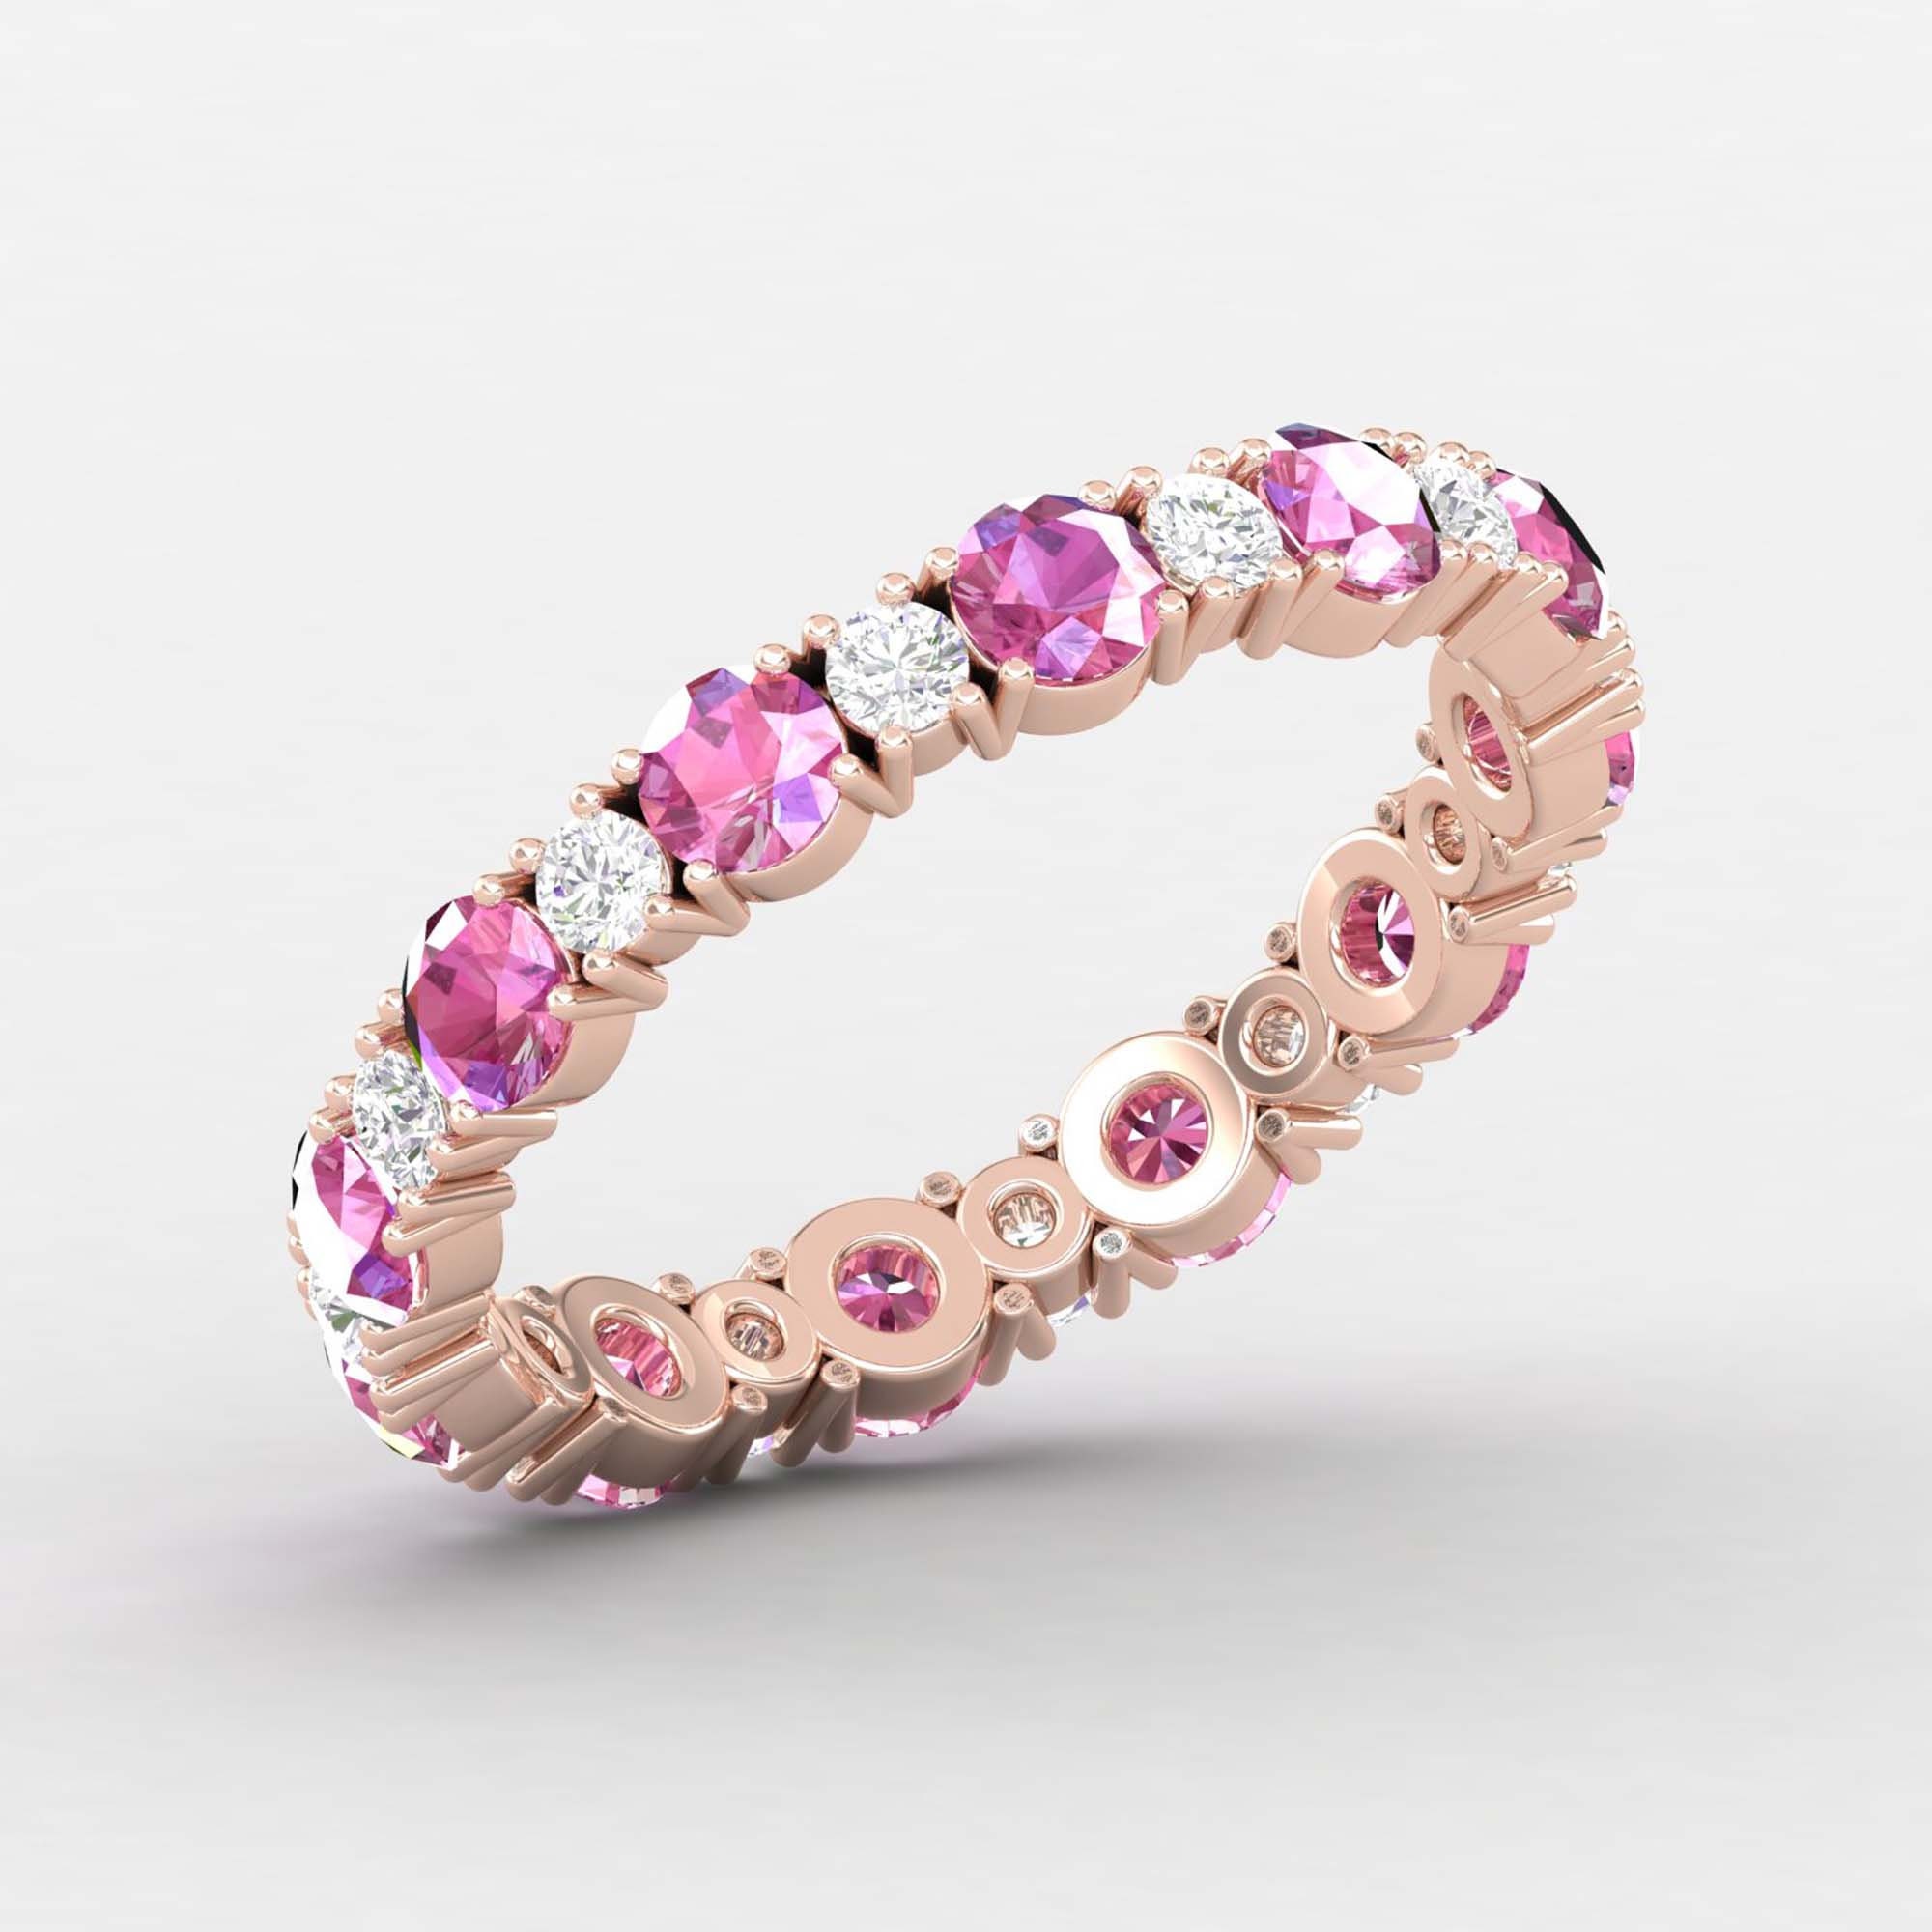 Pink Sapphire Eternity Band, Dainty Ring, Birthstone Jewelry, Gemstone Solid Gold Wedding Stacking Rings For Women